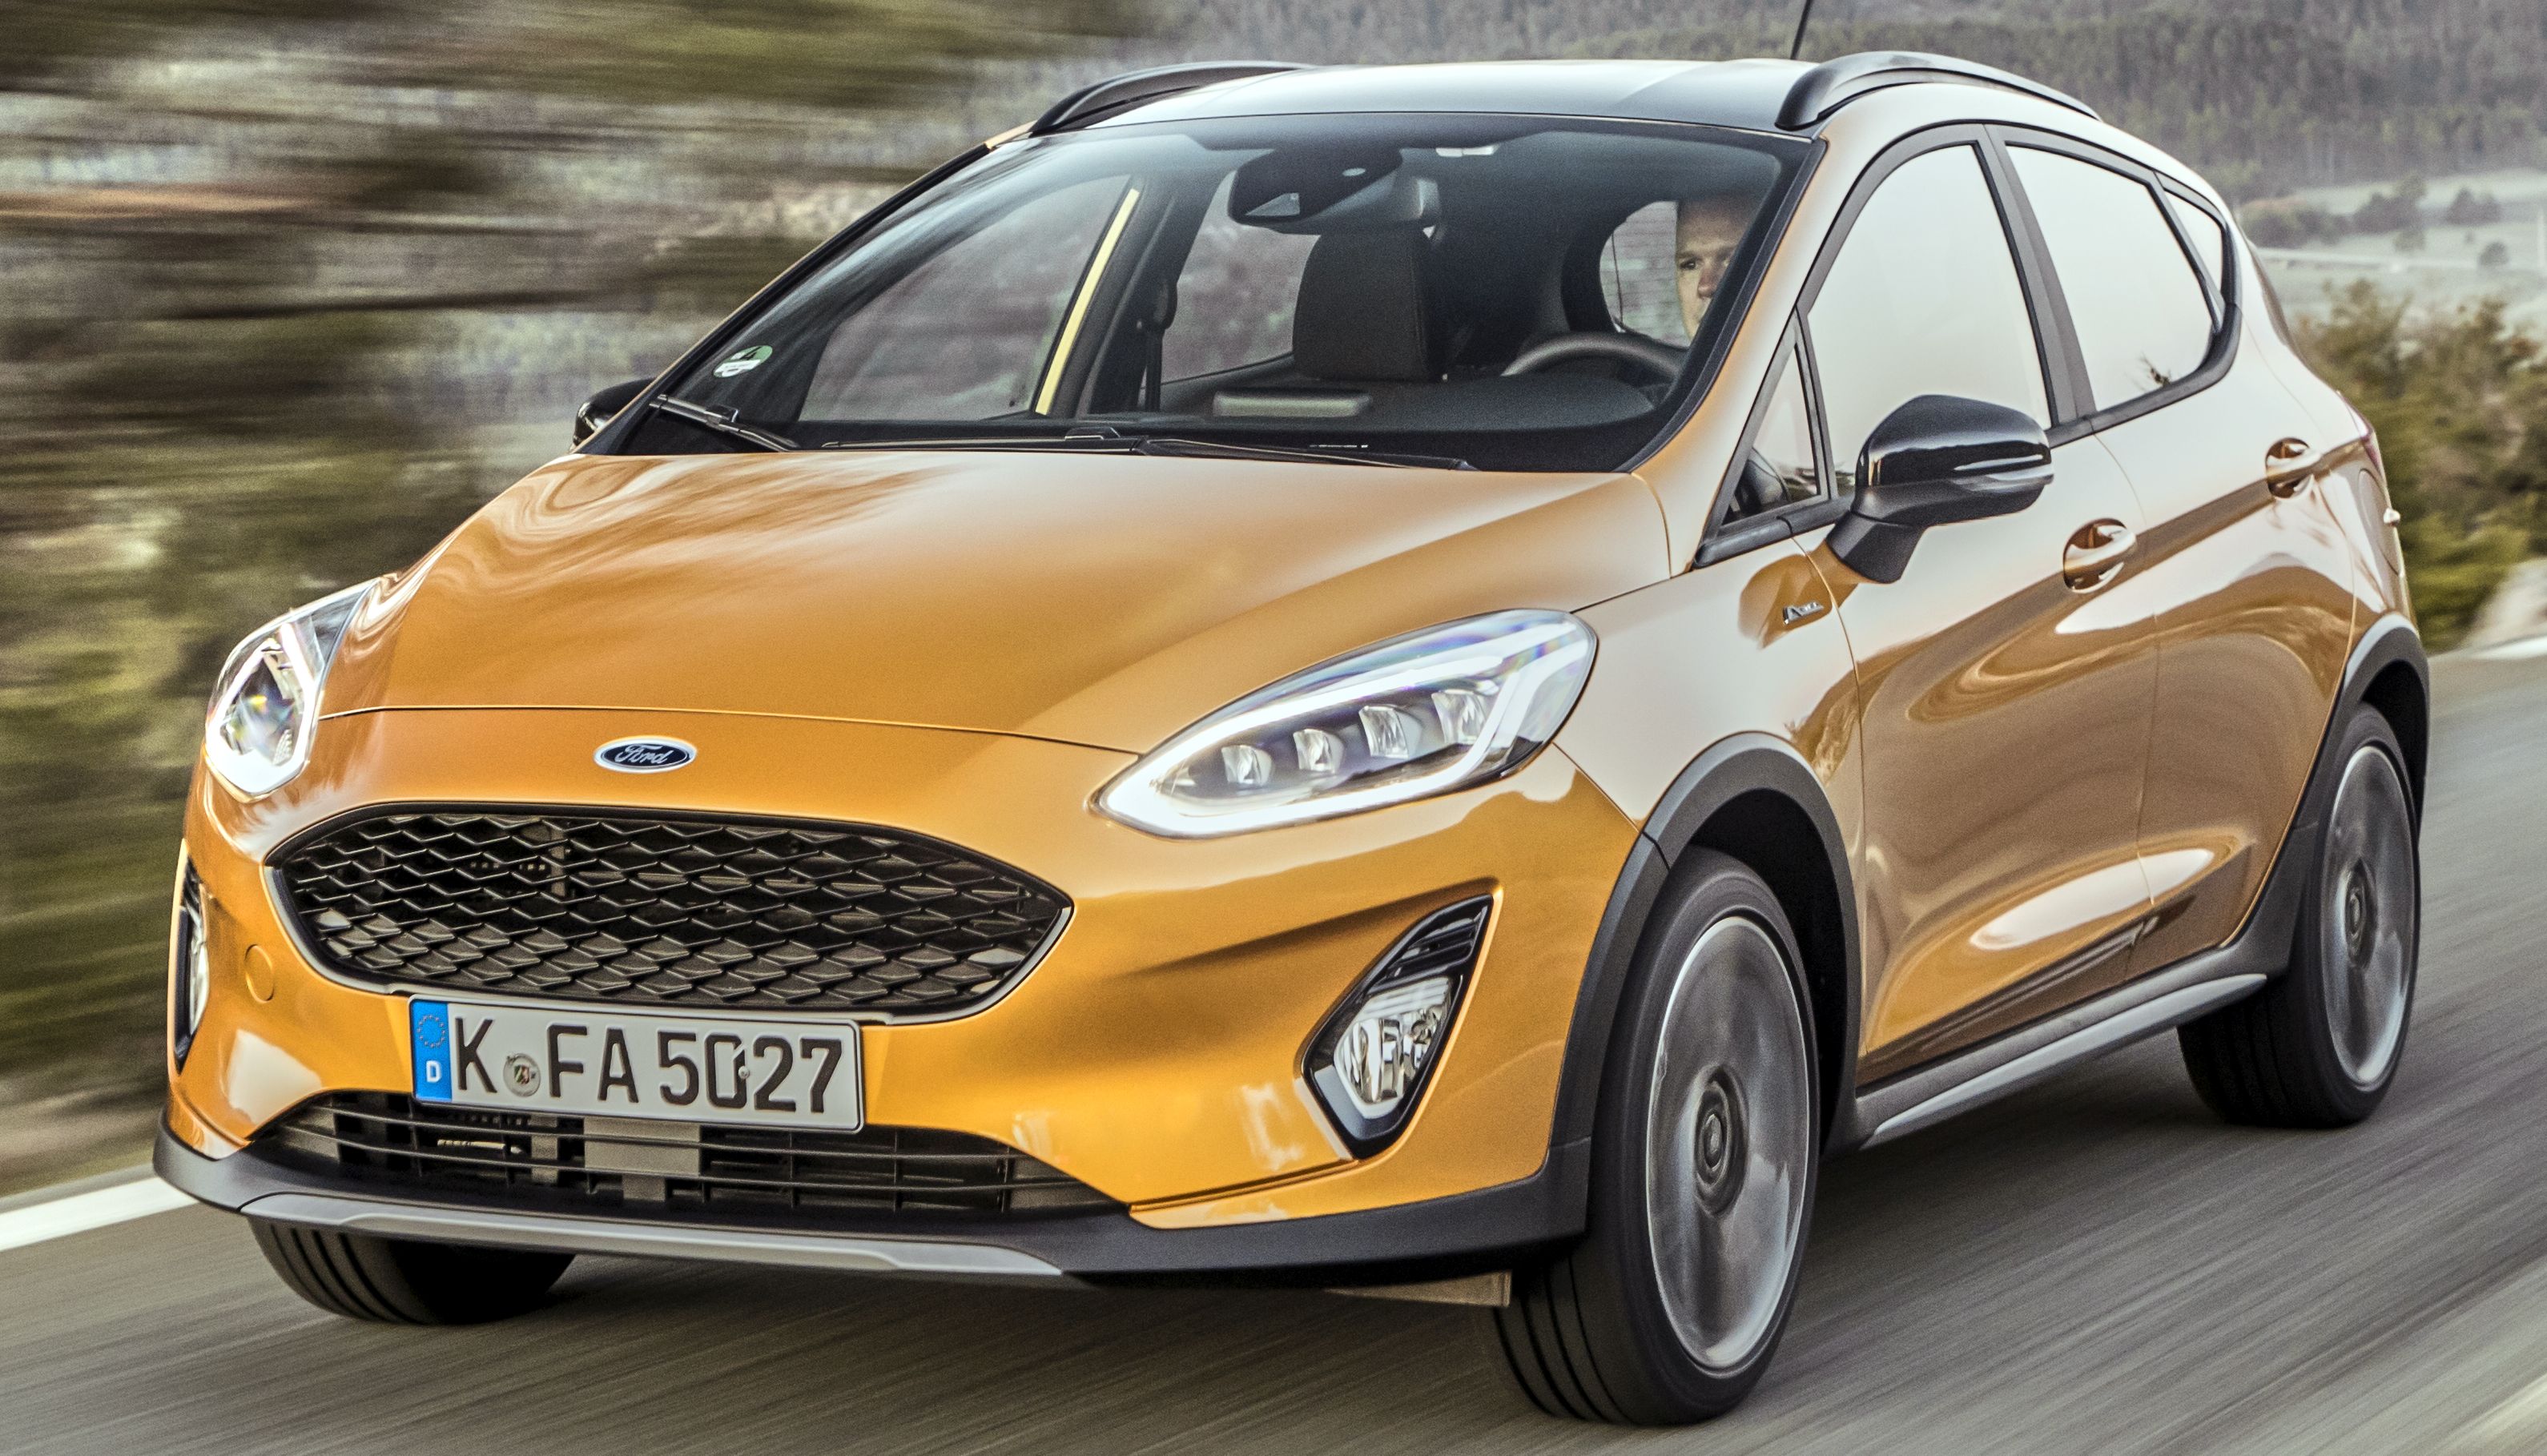 Ford Focus Active Turnier 1.5 Ecoboost specs, performance data